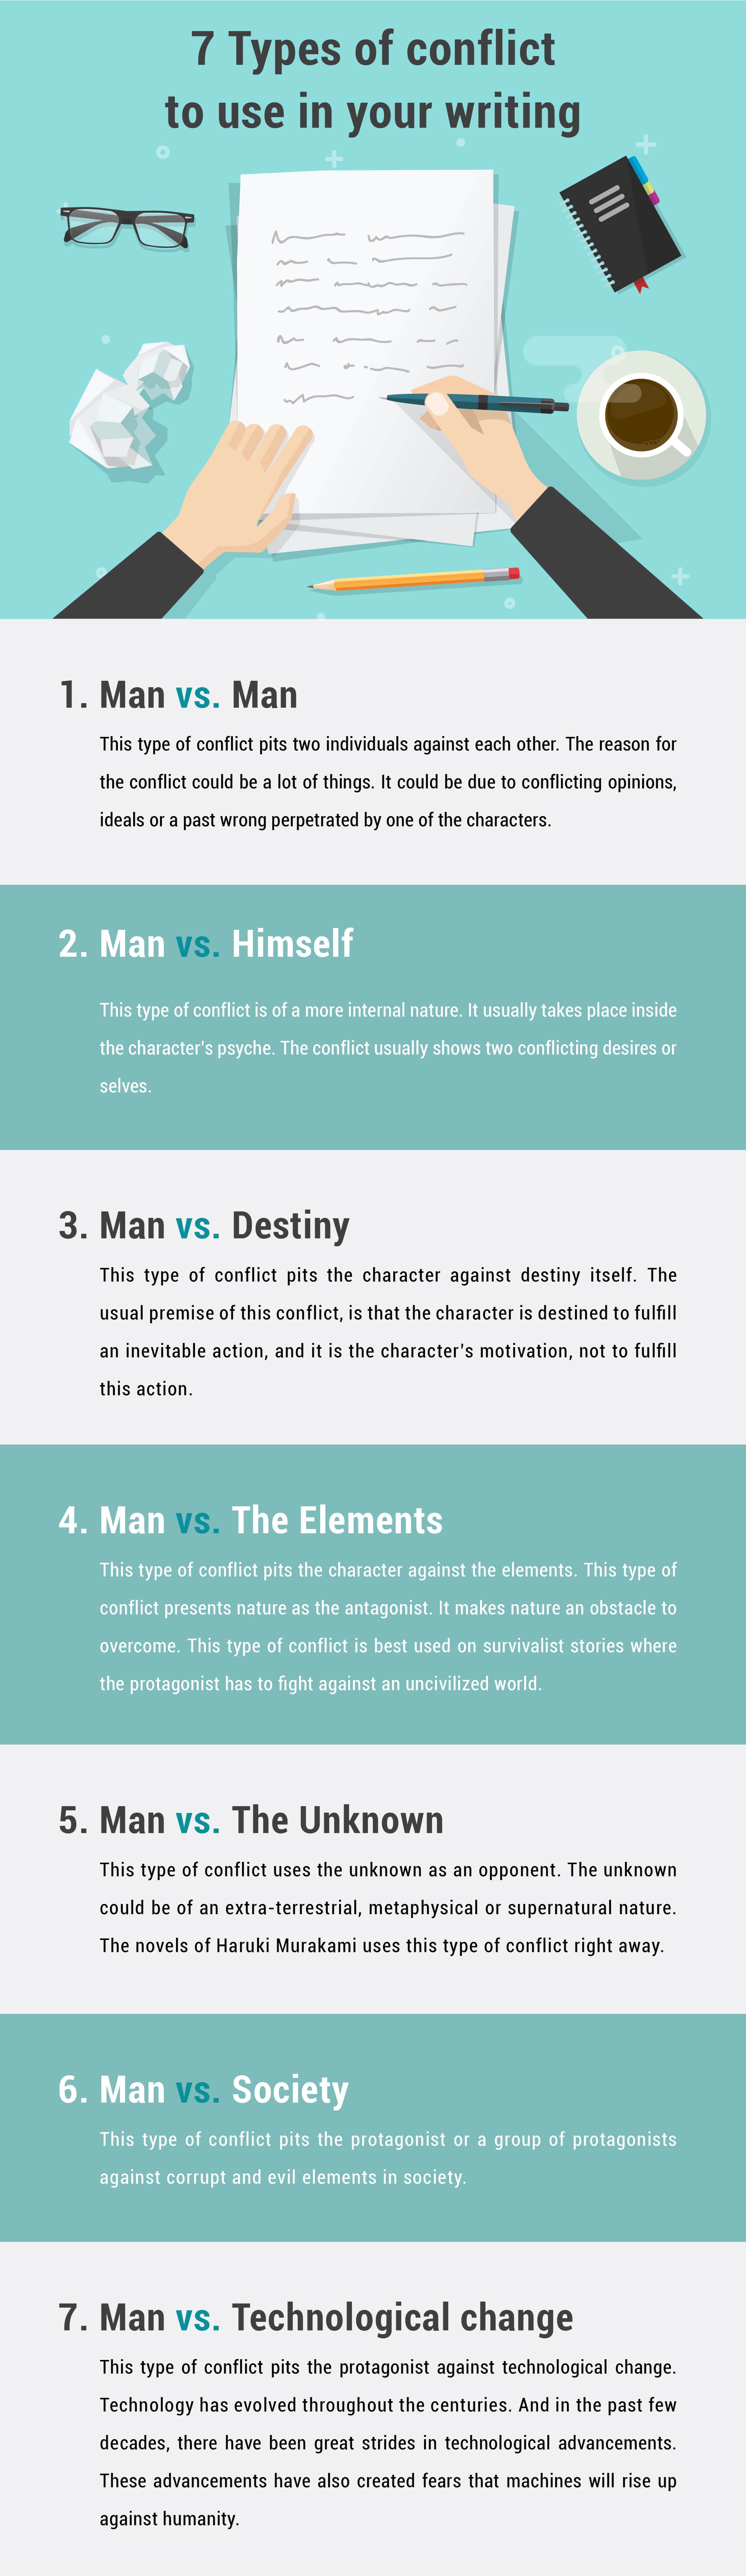 types of conflict in literature